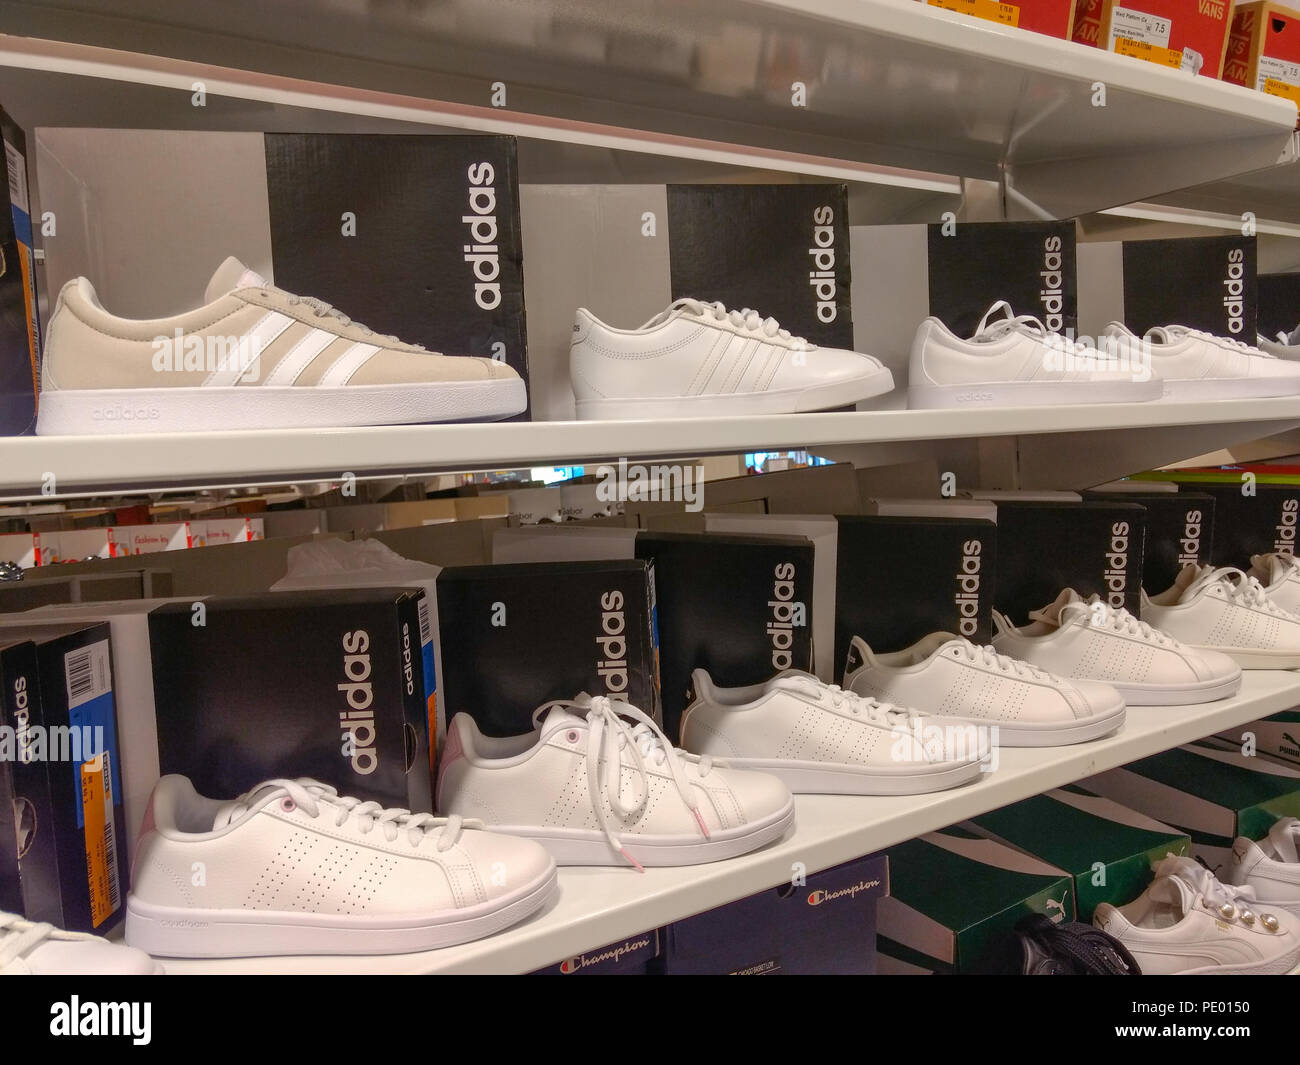 White Adidas sneakers displayed on shelves in store Photo - Alamy